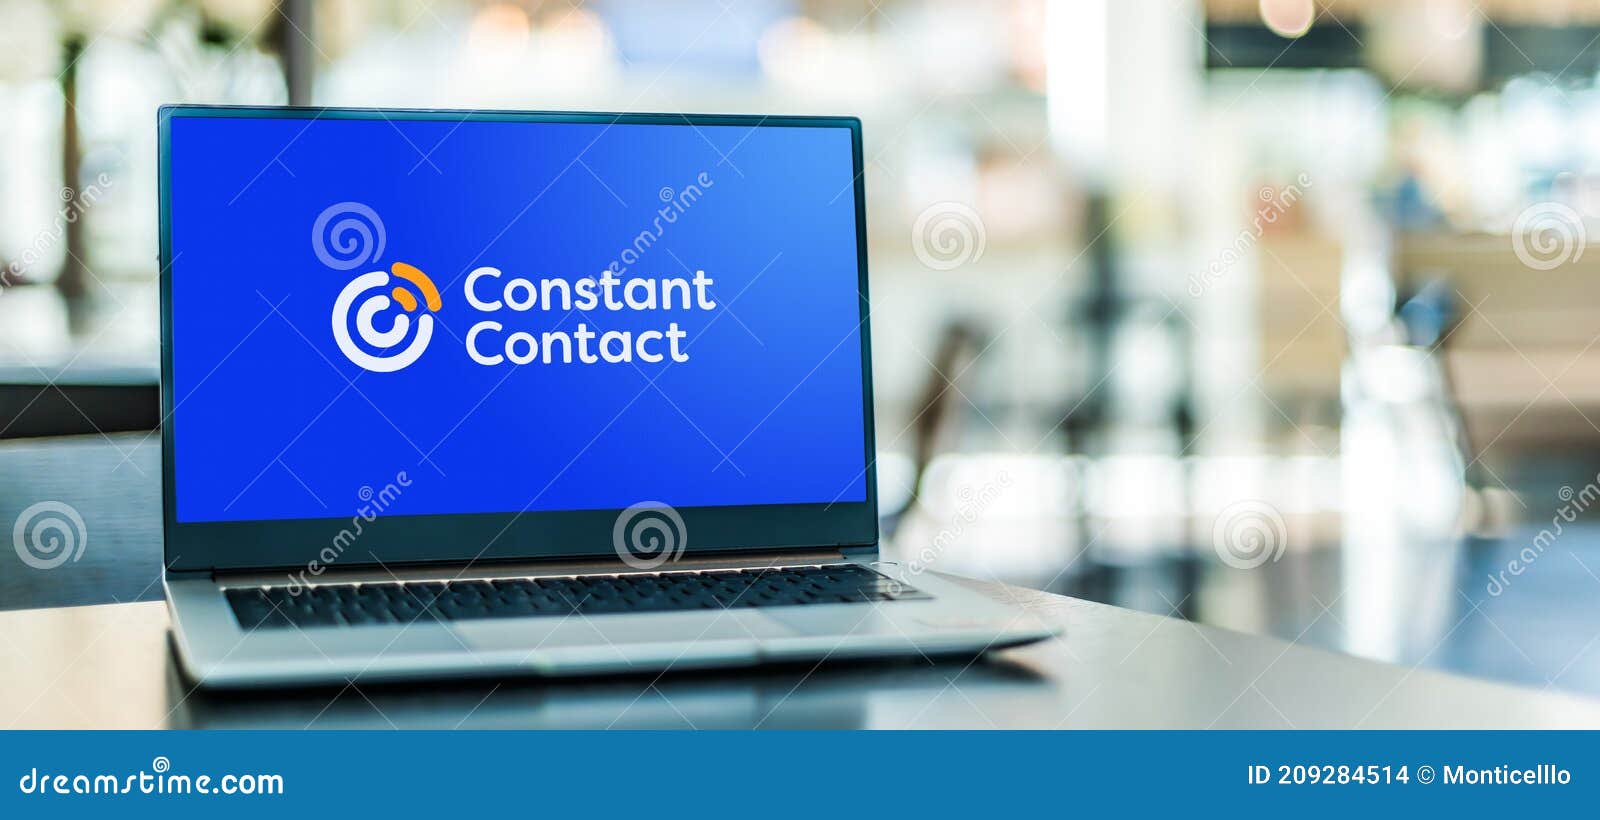 Laptop Computer Displaying Logo of Constant Contact Editorial Stock Image - Image of online, logo: 209284514